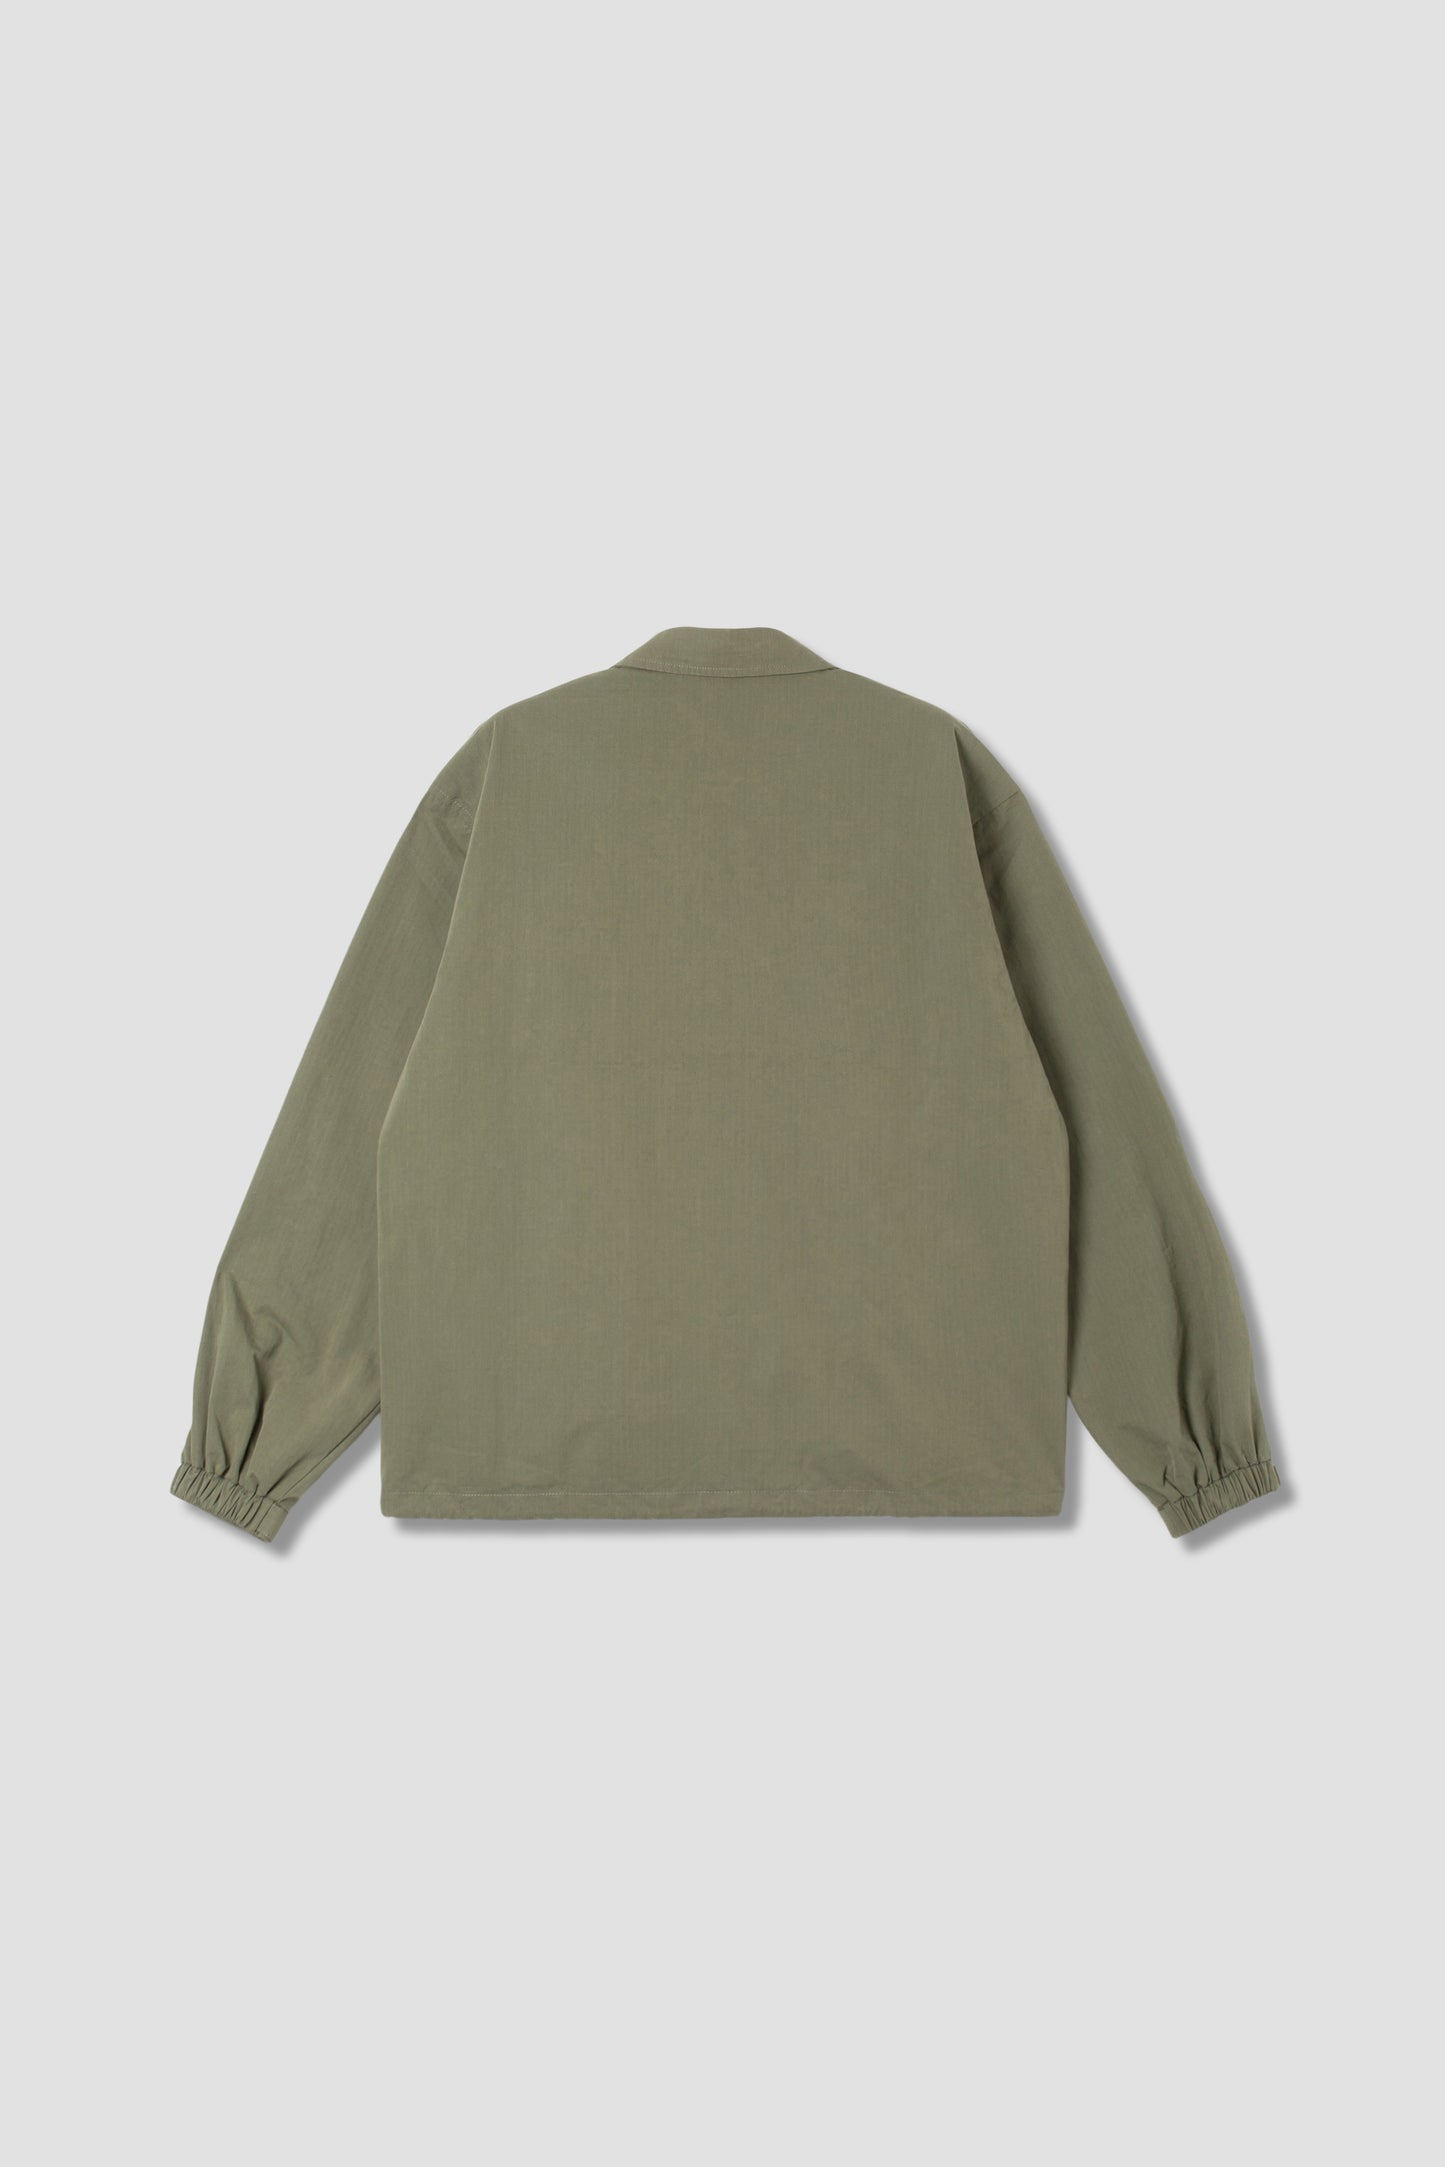 Coach Jacket (Olive Nyco Ripstop)